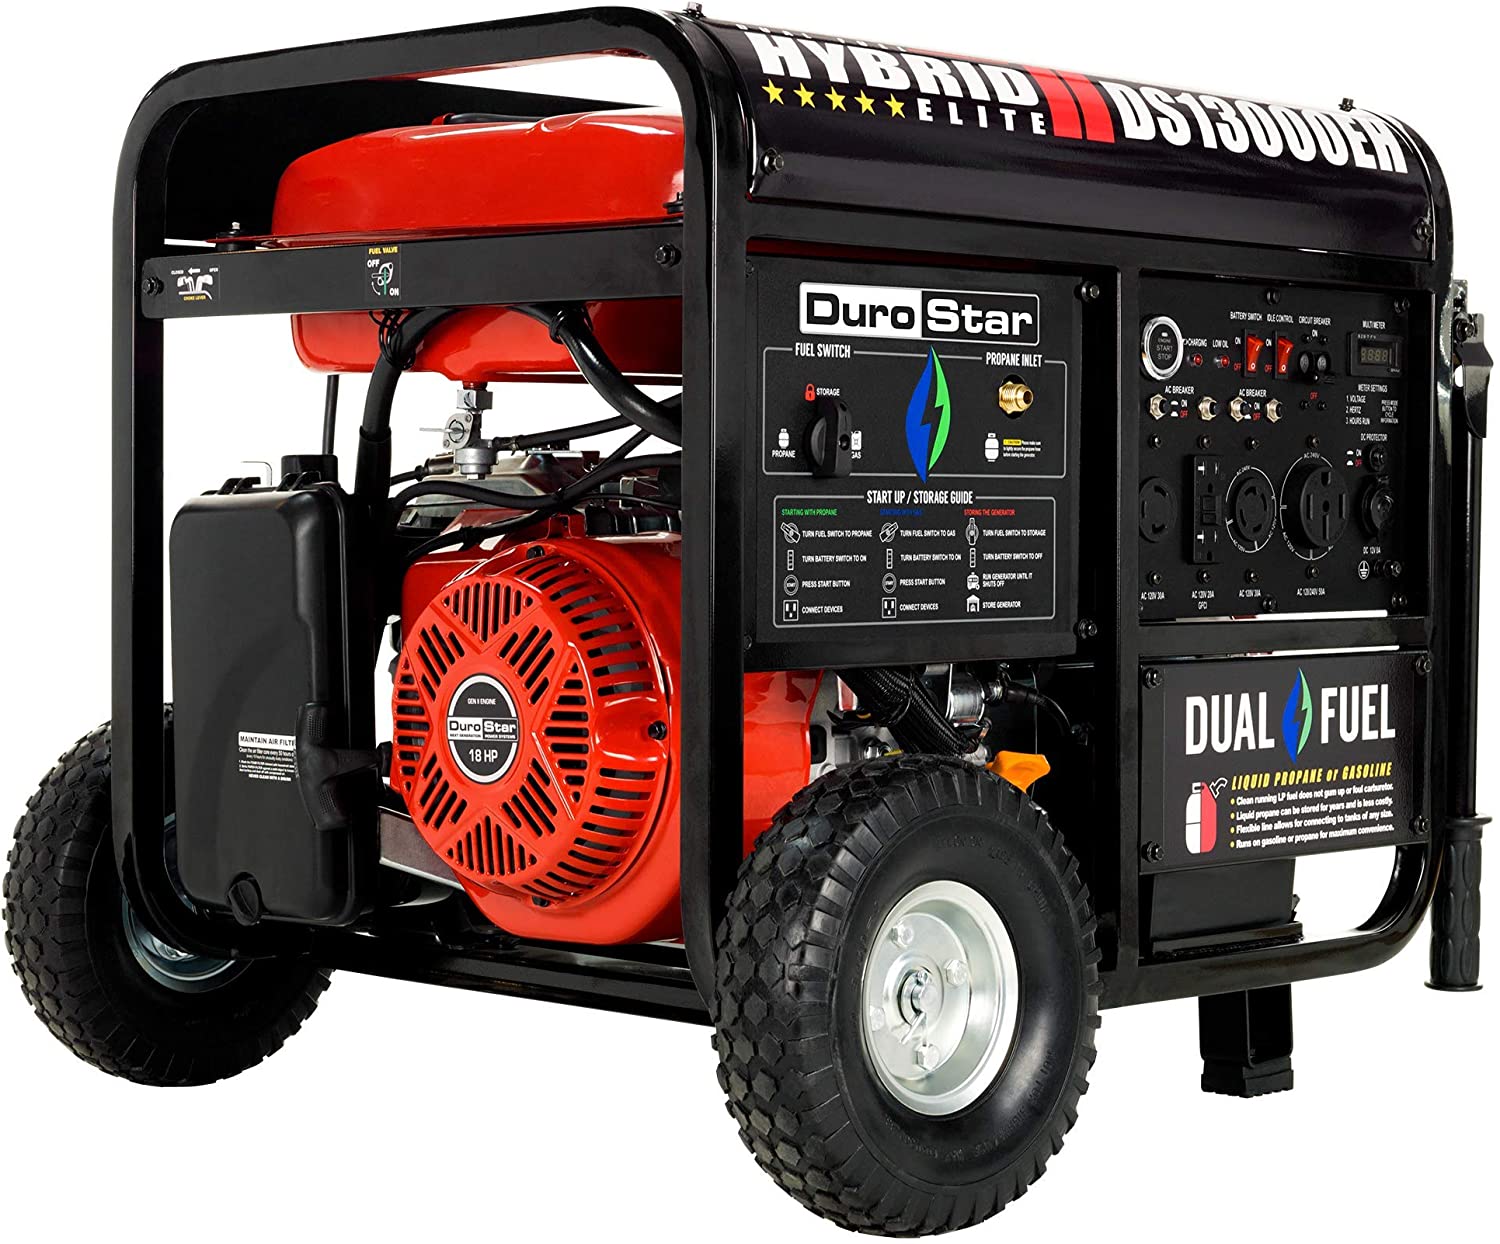 The 5 Best Portable Generators 2022 Review This Old House | Images and ...